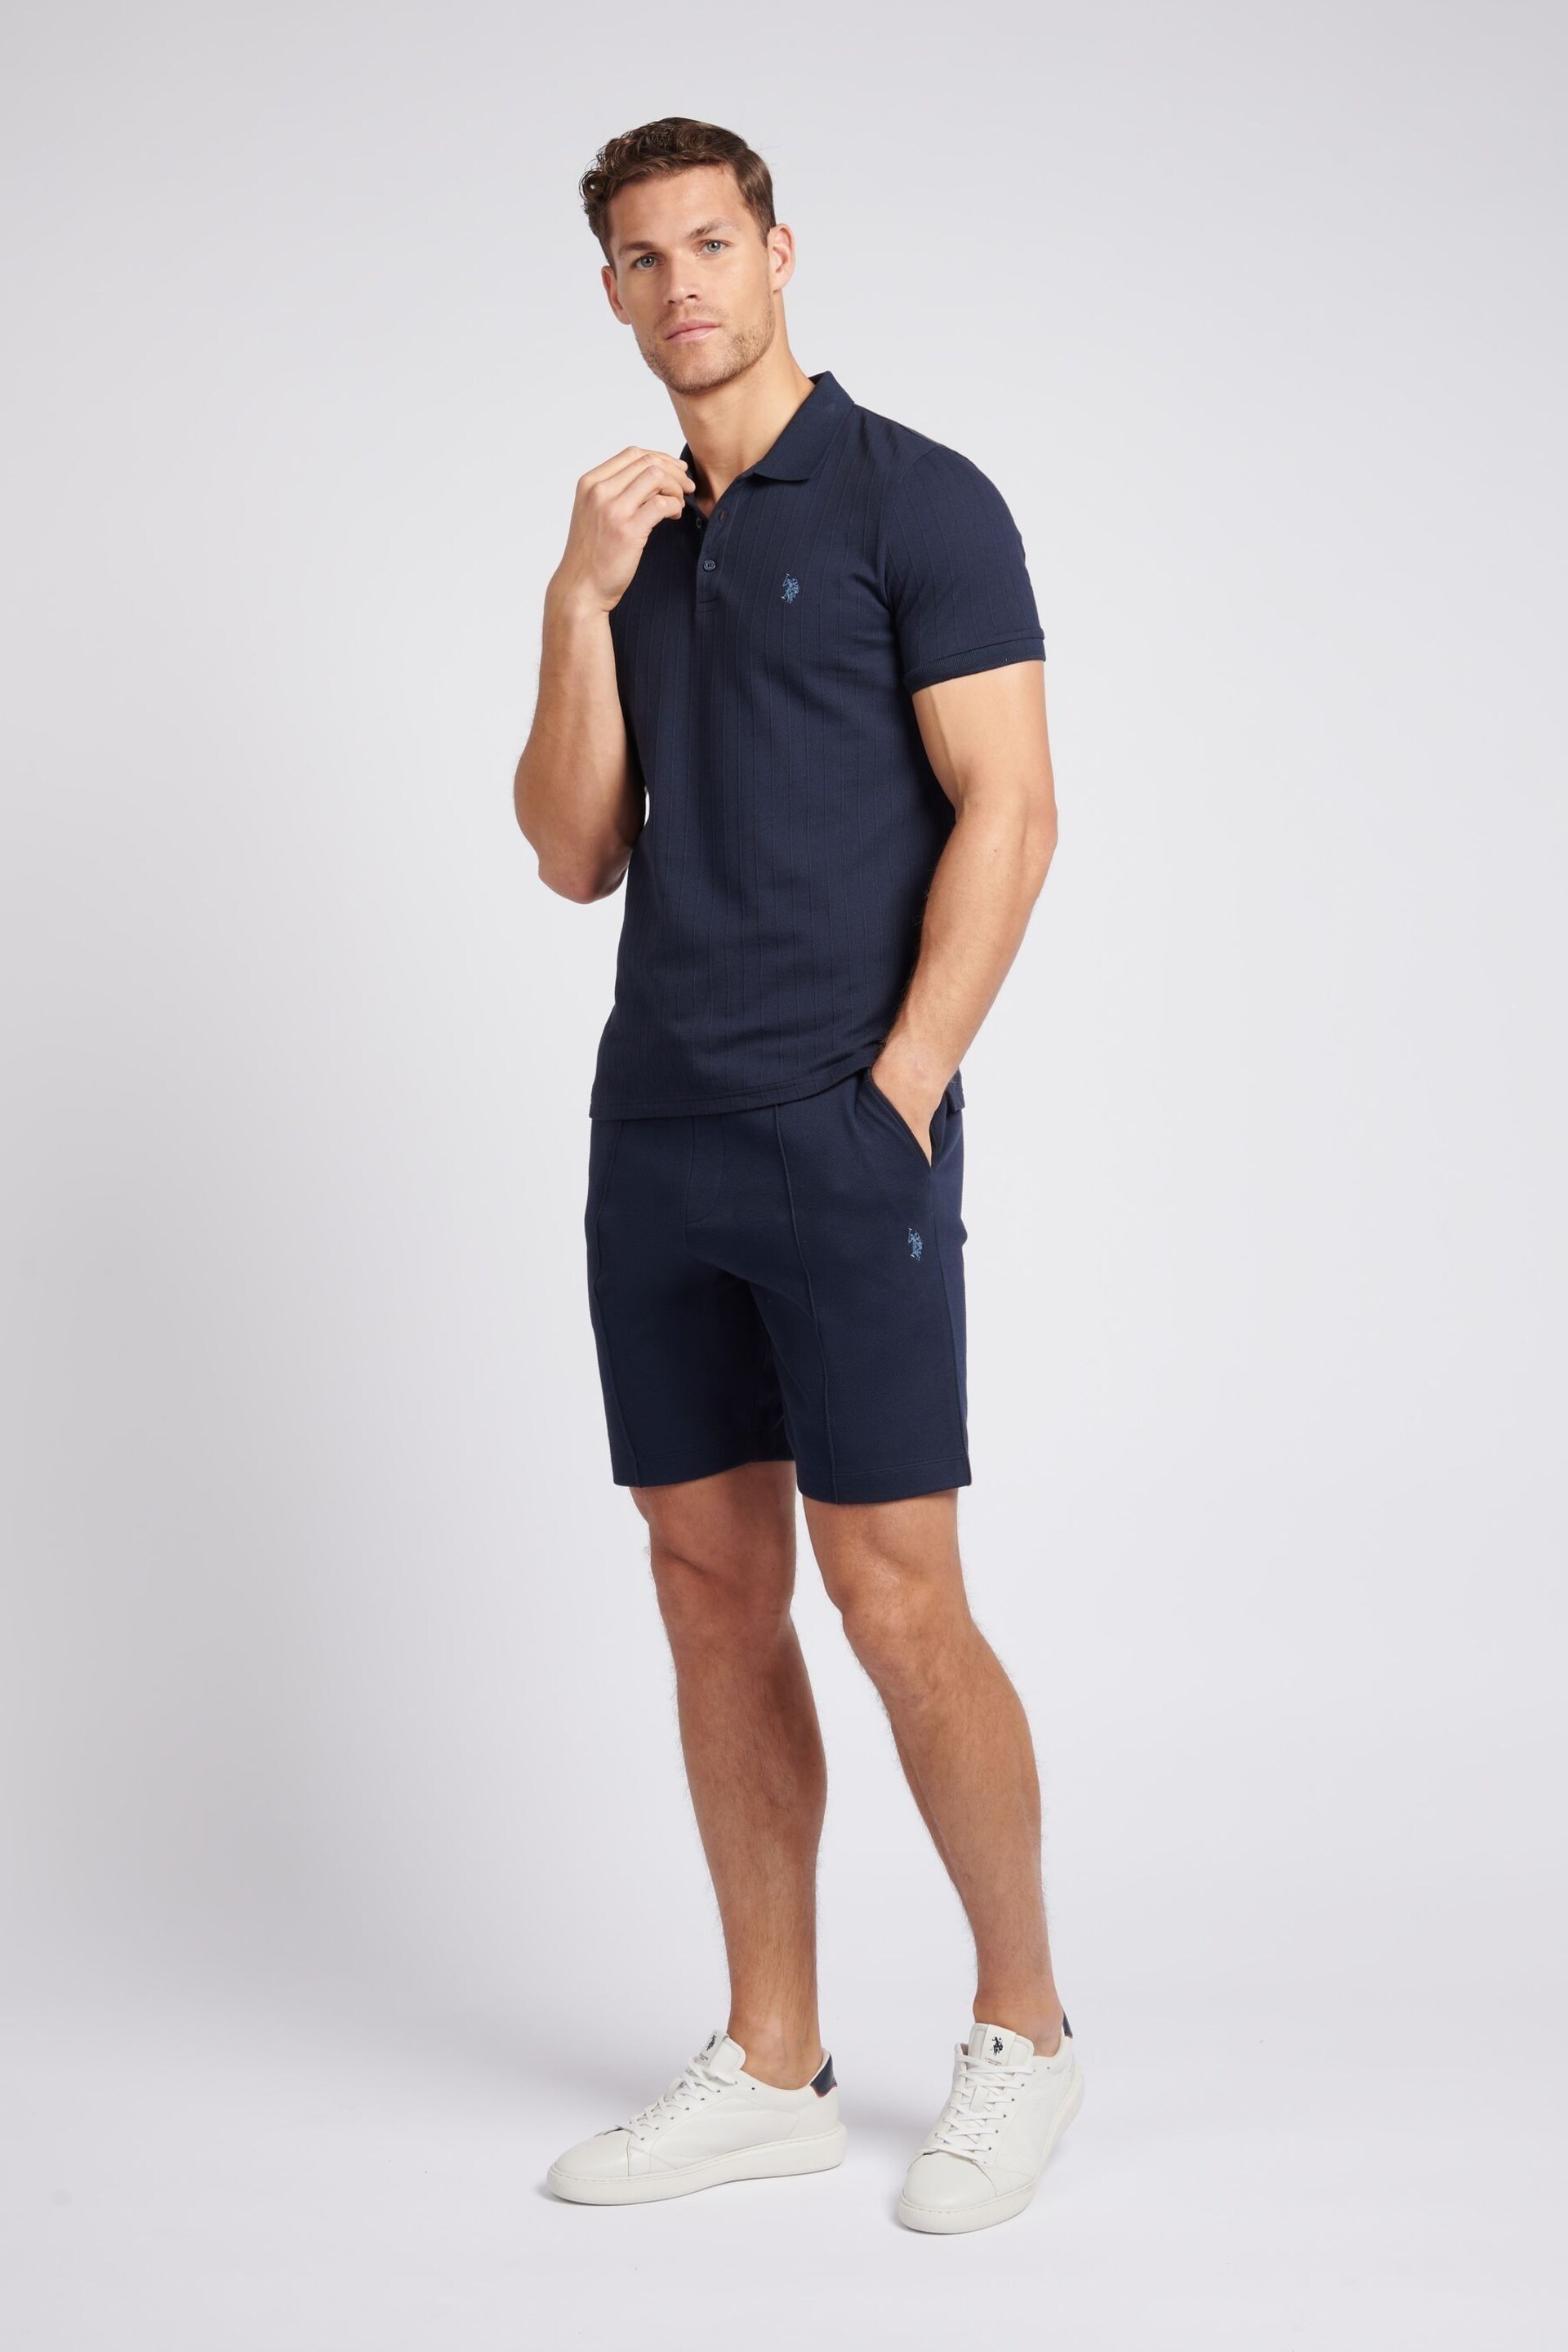 U.S. Polo Assn. Mens Blue Classic Fit Pin Tuck Shorts - Image 3 of 7